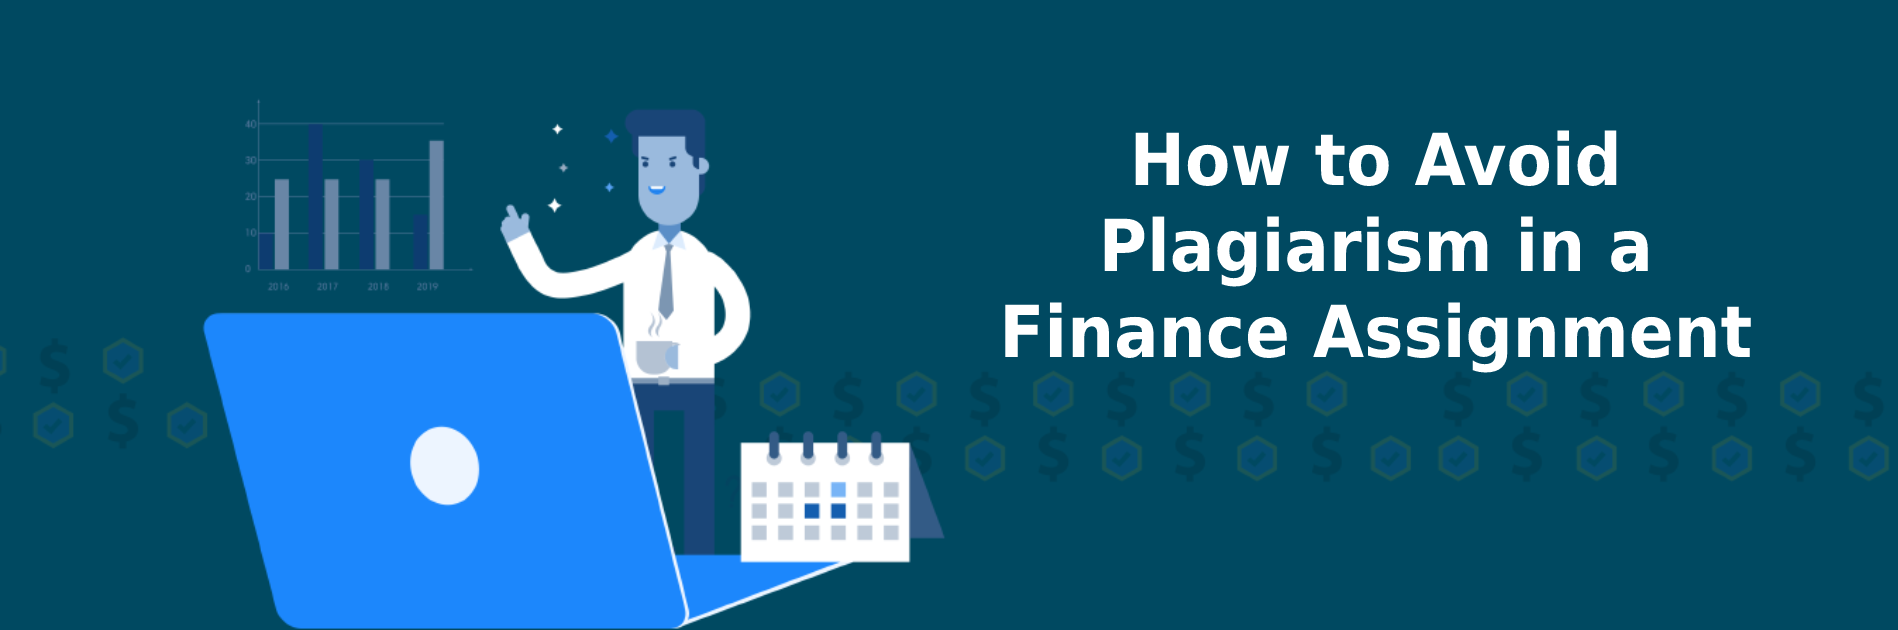 How-to-Avoid-Plagiarism-in-a-Finance-Assignment